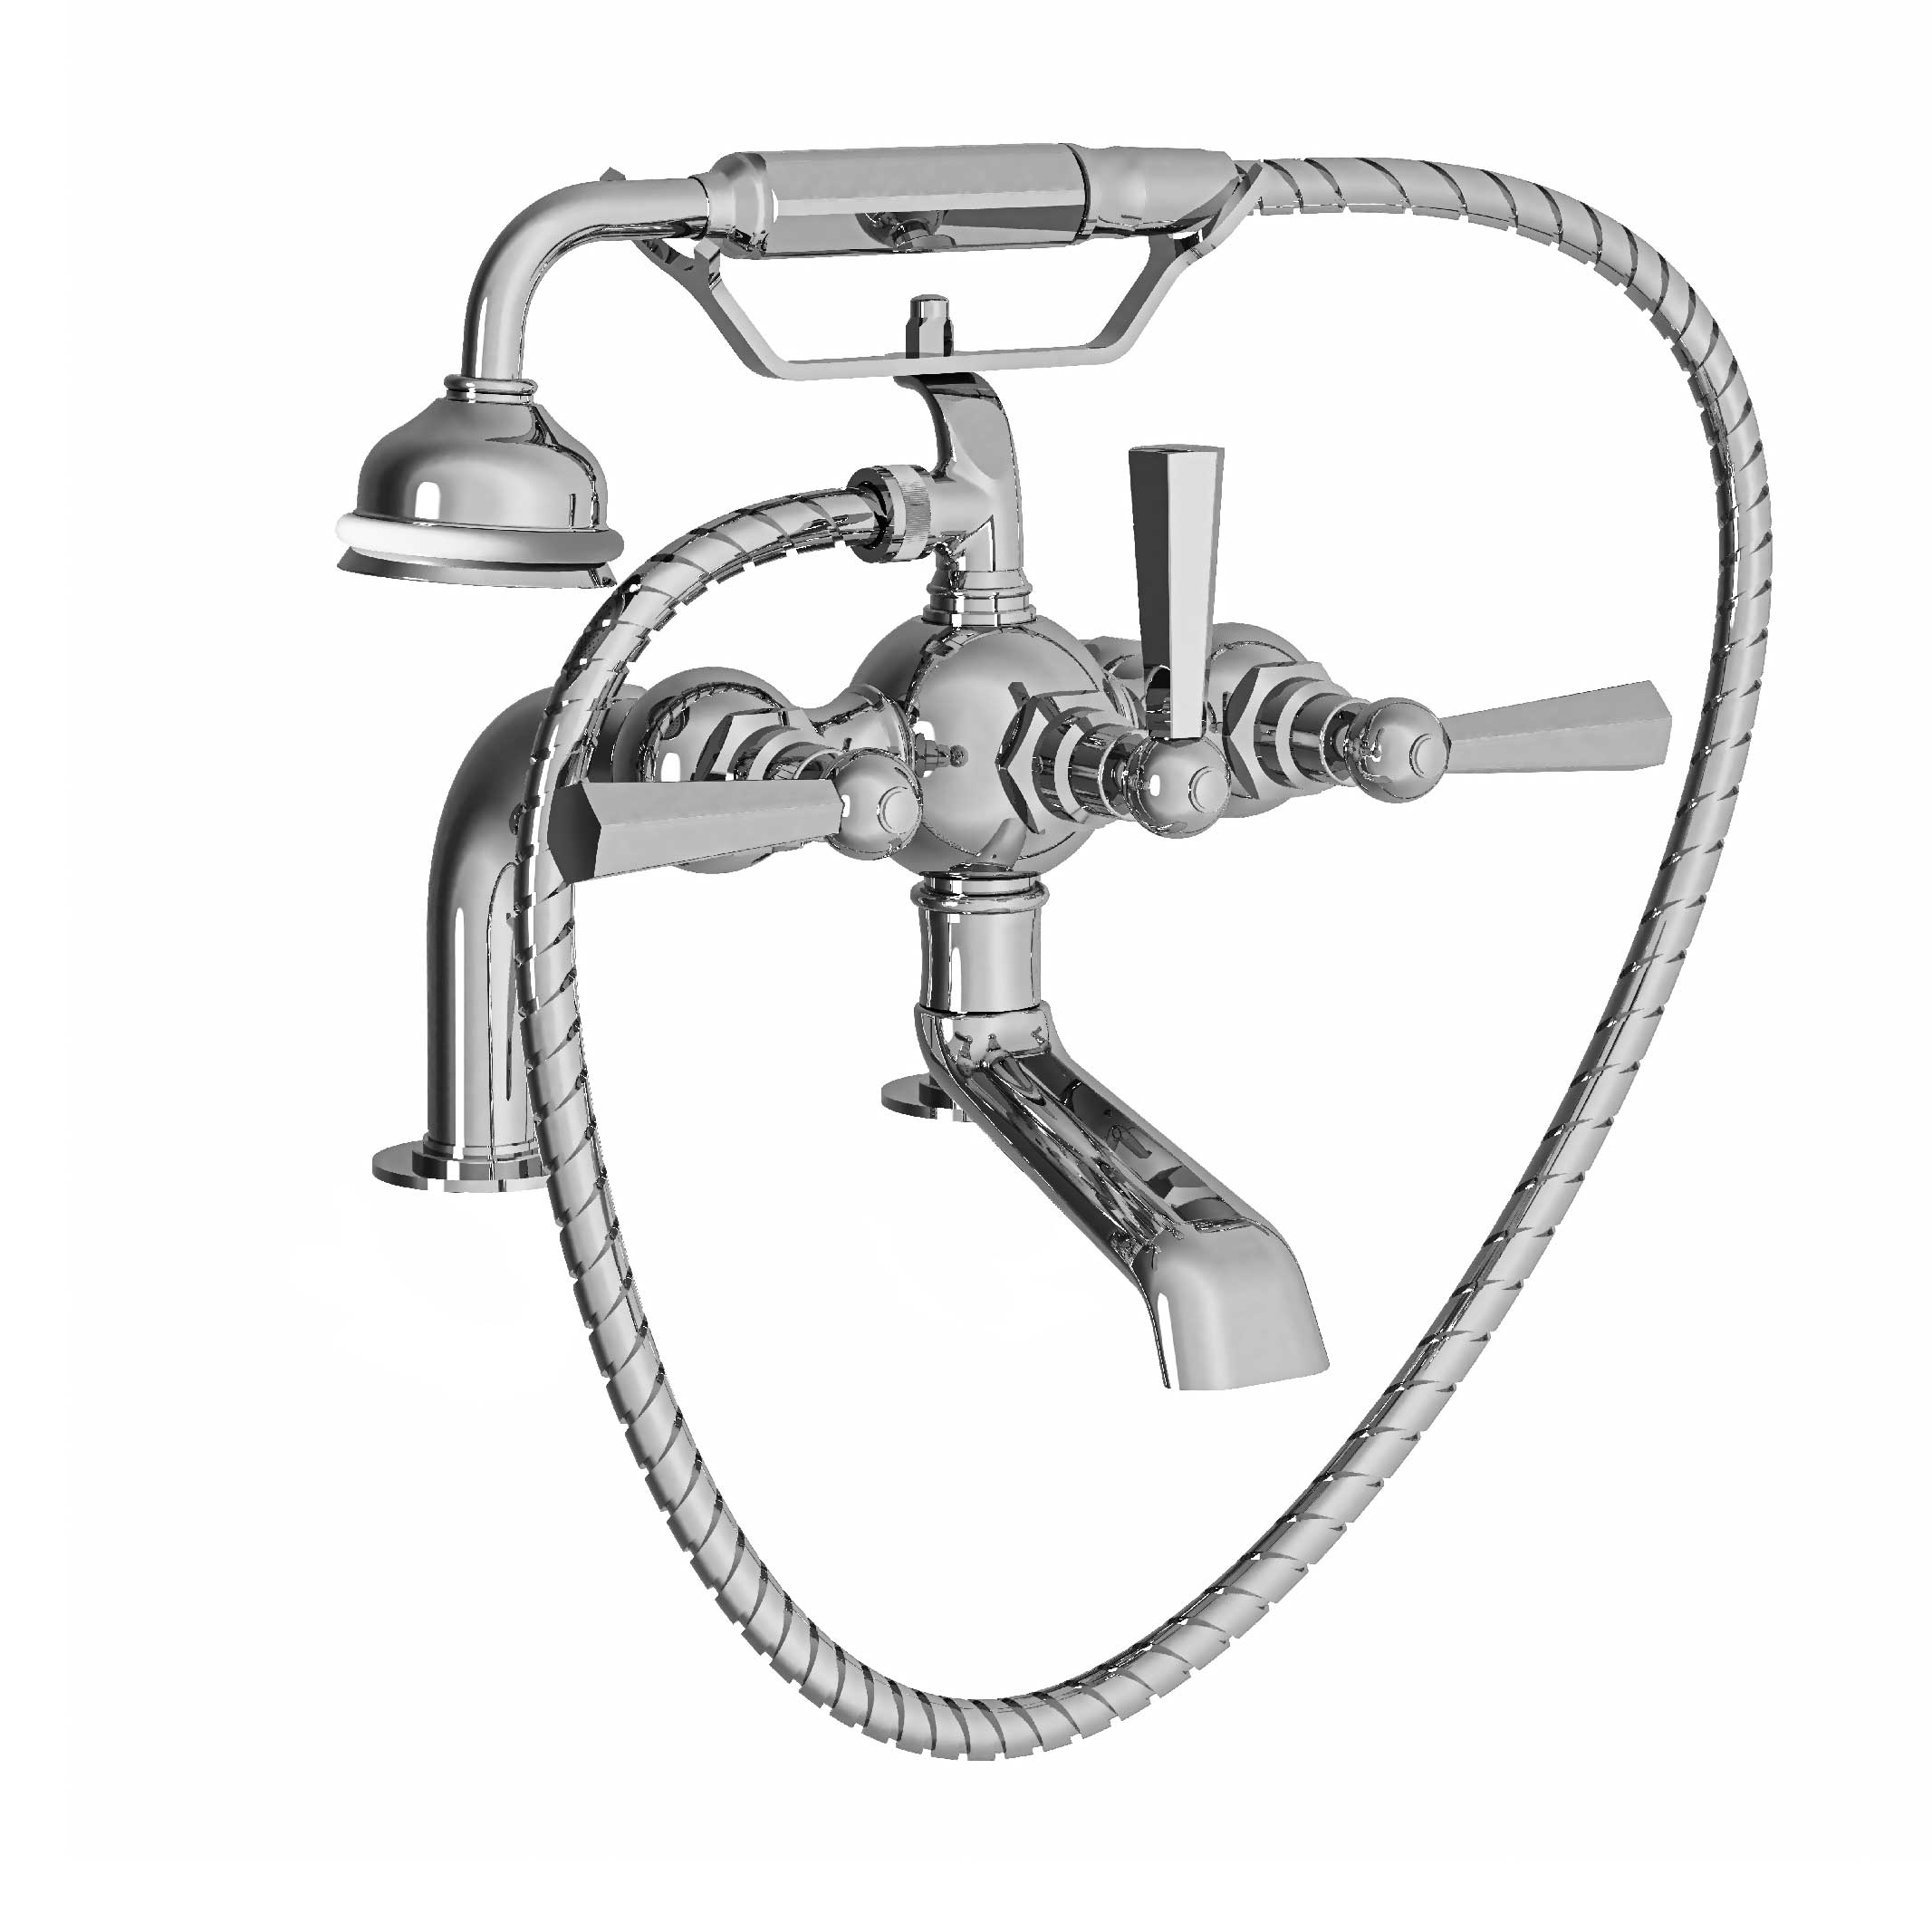 M39-3306 Rim mounted bath and shower mixer